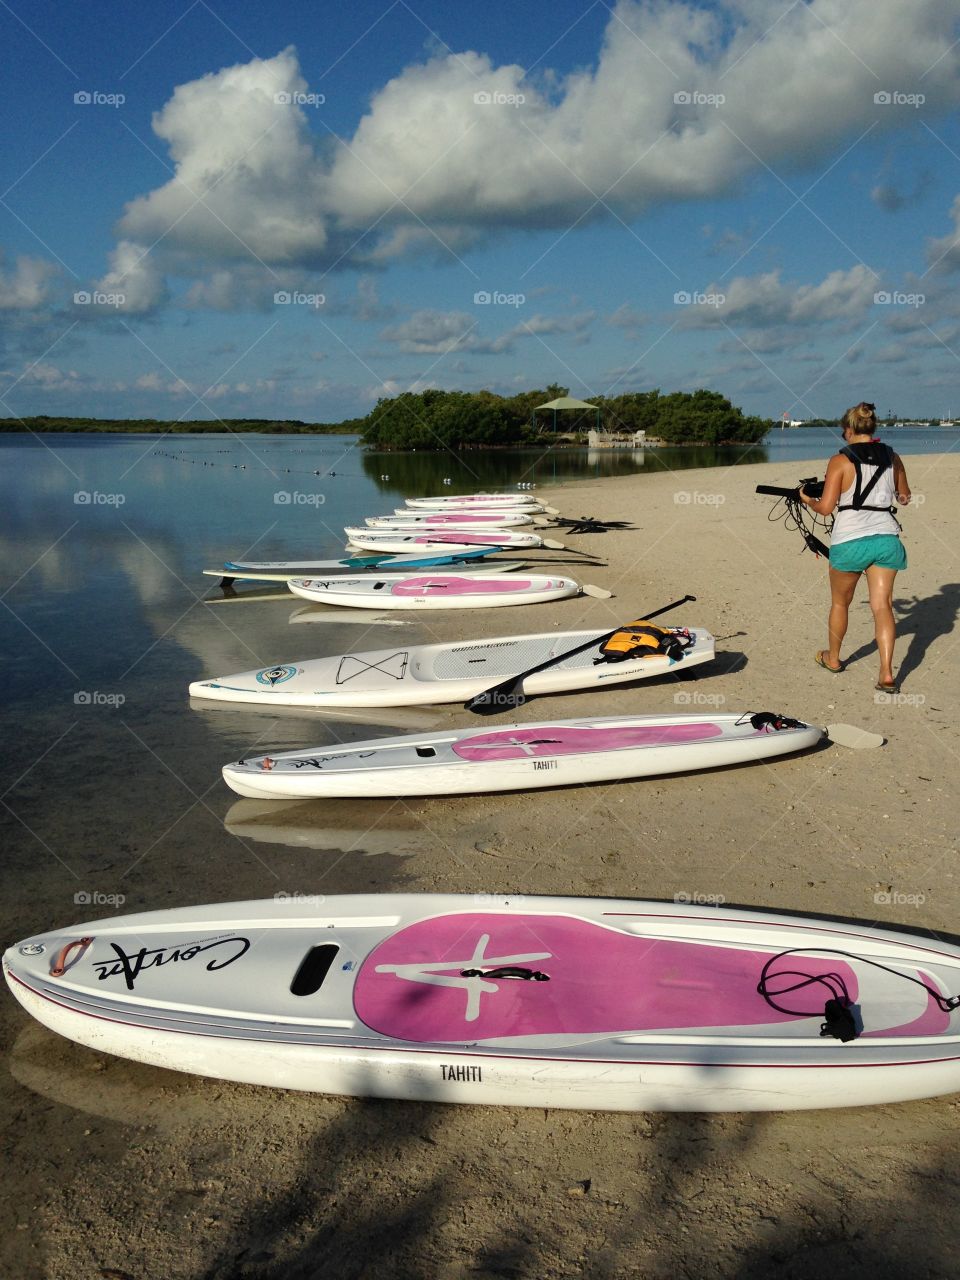 Paddle board day